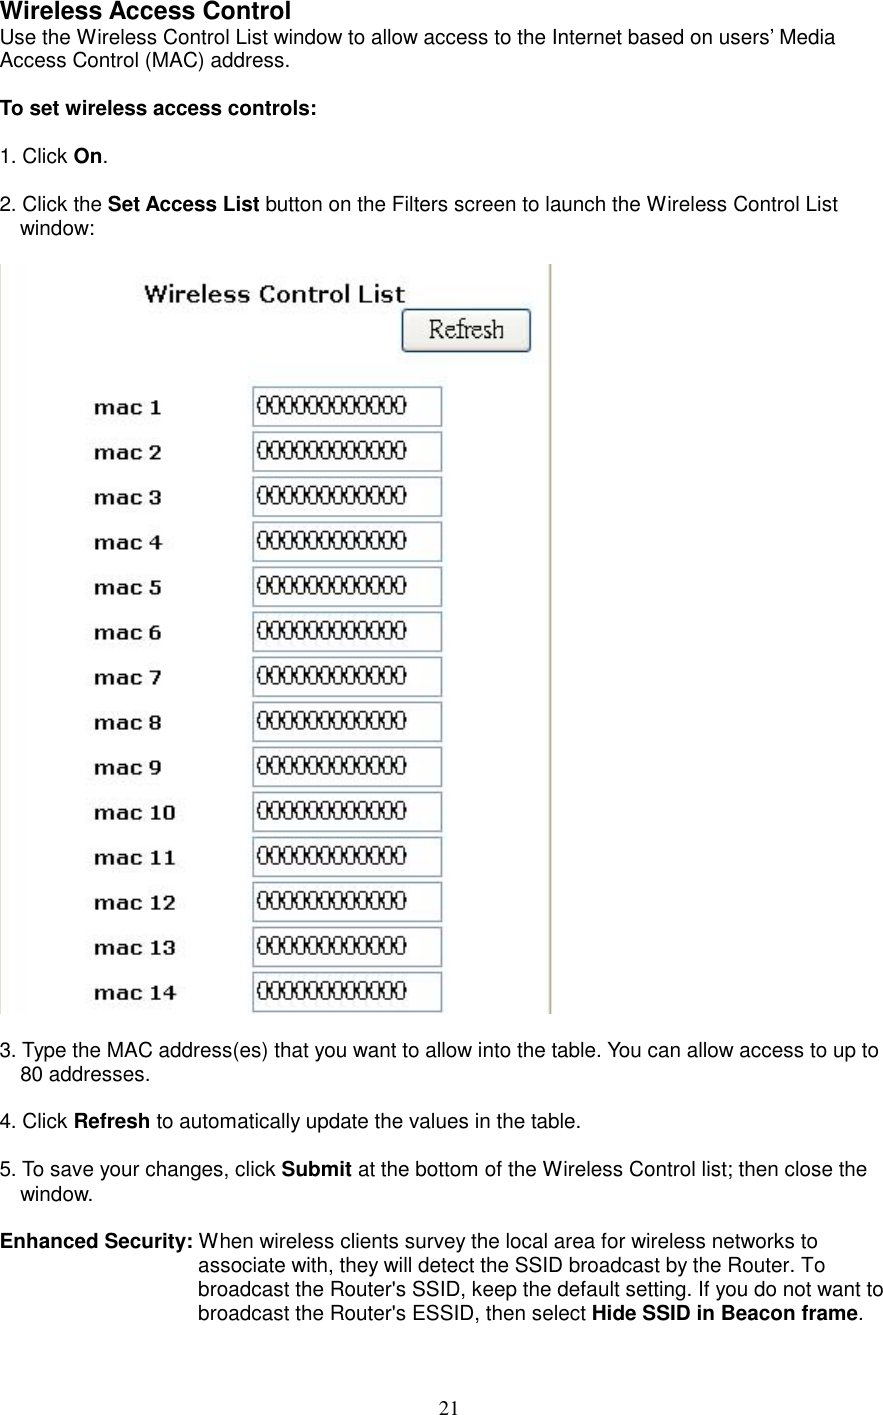  21Wireless Access Control Use the Wireless Control List window to allow access to the Internet based on users’ Media Access Control (MAC) address.  To set wireless access controls:  1. Click On.  2. Click the Set Access List button on the Filters screen to launch the Wireless Control List window:     3. Type the MAC address(es) that you want to allow into the table. You can allow access to up to 80 addresses.  4. Click Refresh to automatically update the values in the table.  5. To save your changes, click Submit at the bottom of the Wireless Control list; then close the window.  Enhanced Security: When wireless clients survey the local area for wireless networks to associate with, they will detect the SSID broadcast by the Router. To broadcast the Router&apos;s SSID, keep the default setting. If you do not want to broadcast the Router&apos;s ESSID, then select Hide SSID in Beacon frame. 